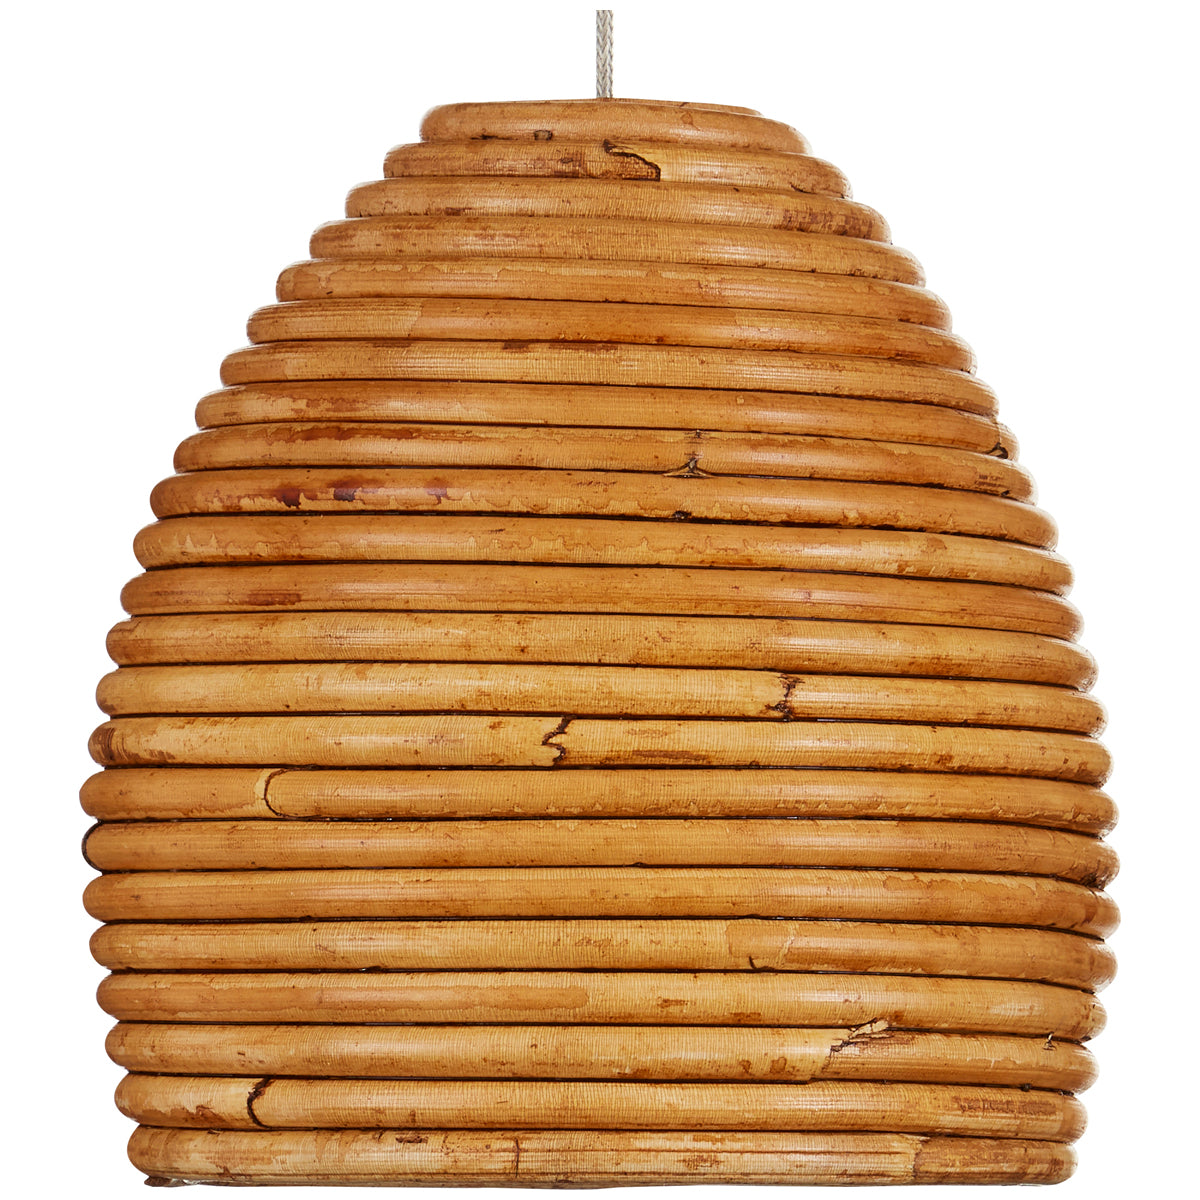 Currey and Company Beehive Round 7-Light Multi-Drop Pendant